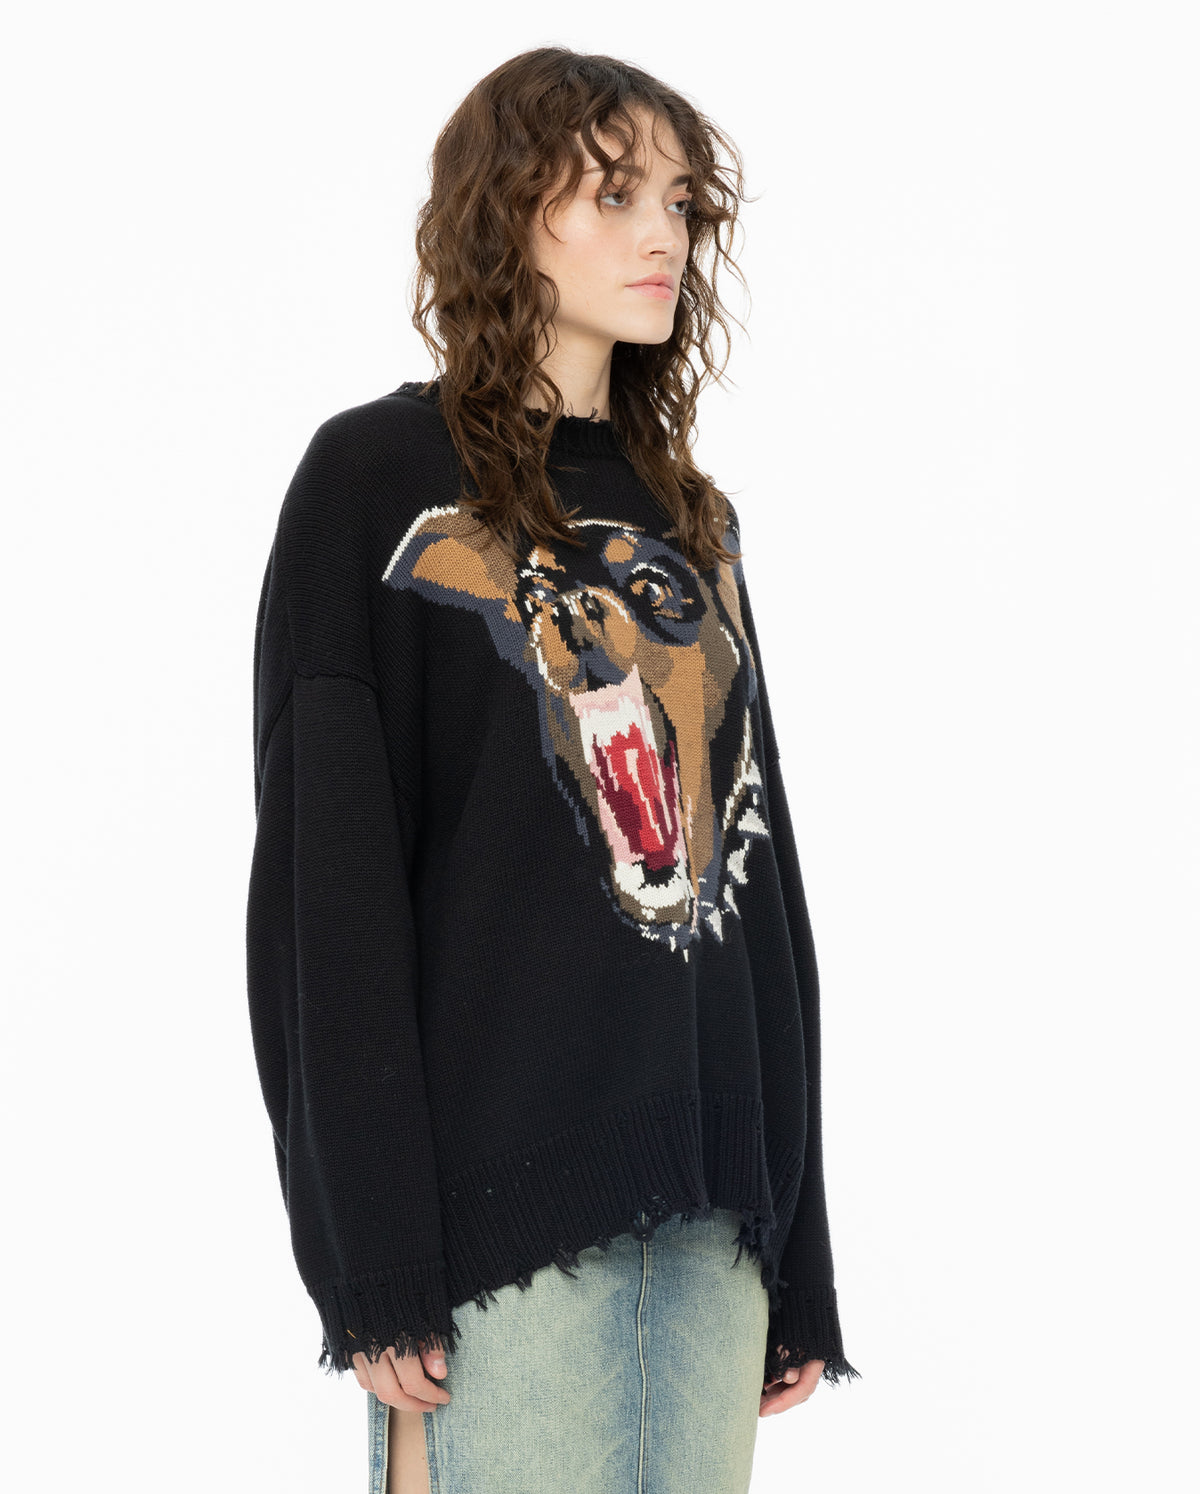 Angry Chihuahua Oversized Sweater - Black